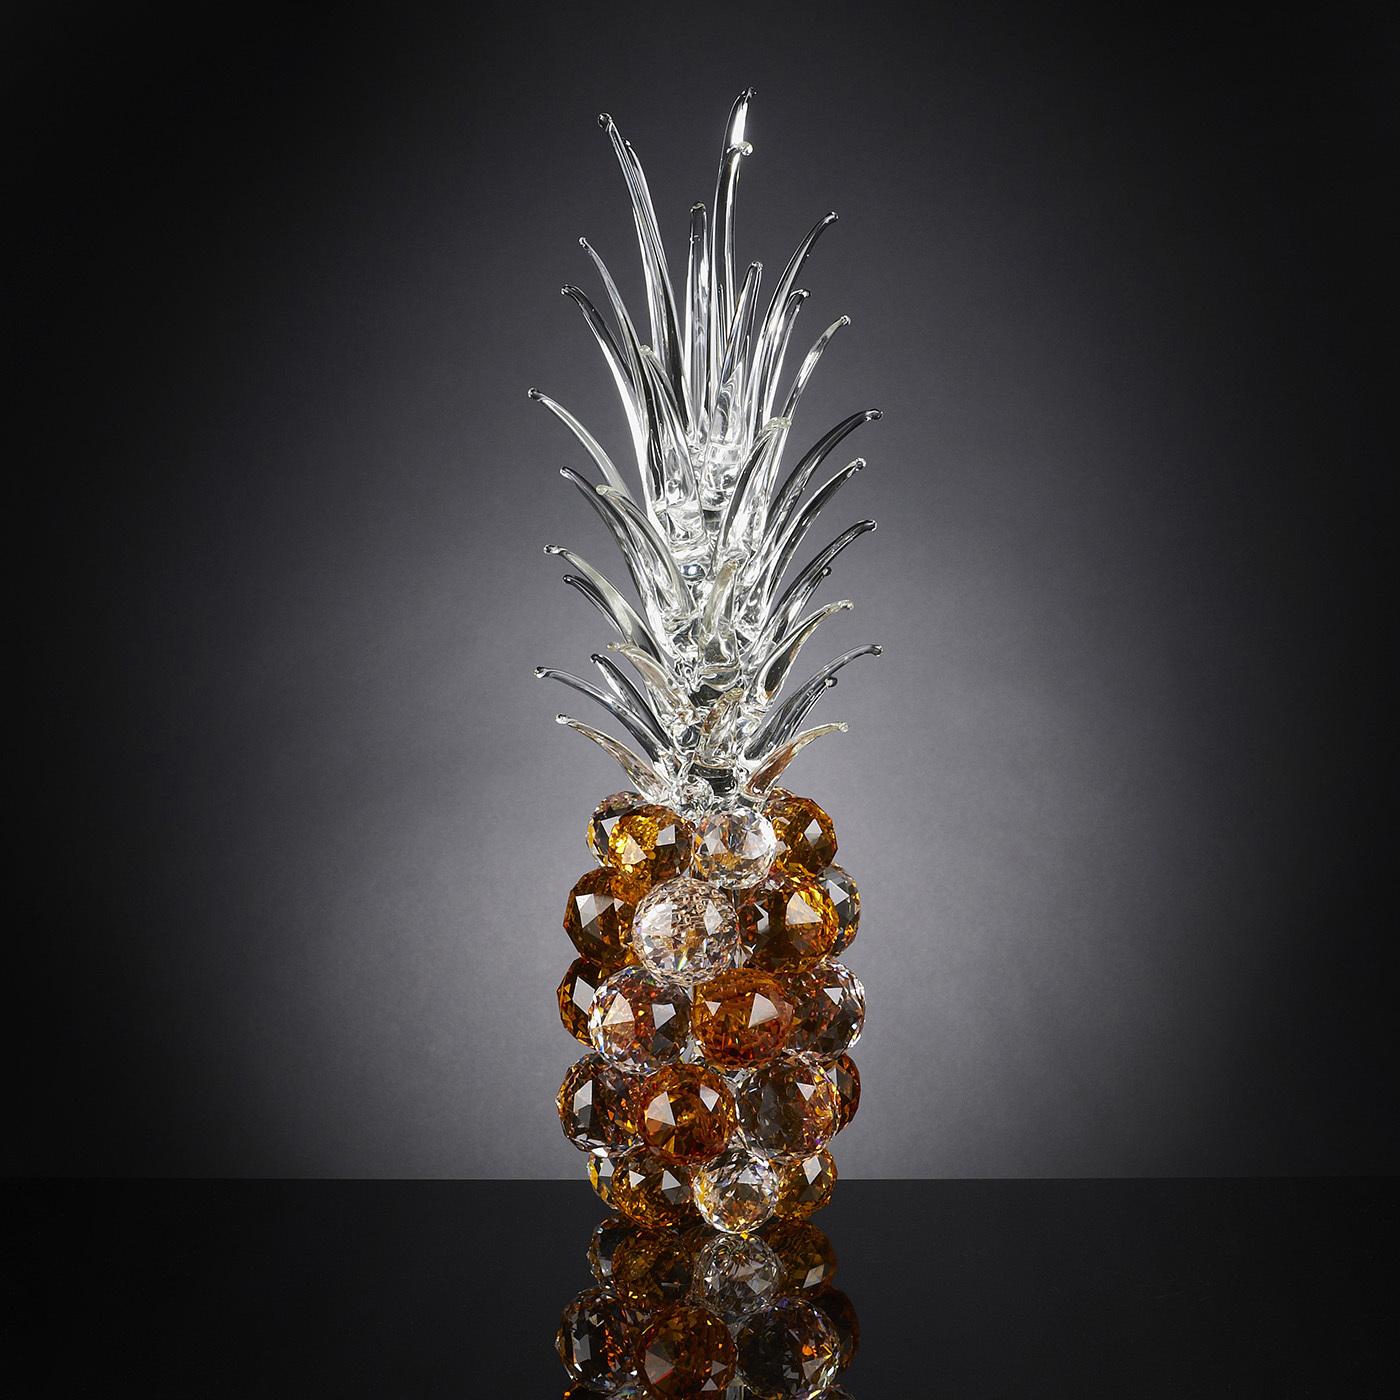 A superb objet d'art, this pineapple-shaped crystal sculpture will make a refined statement in an elegant and modern home. A superb showcase of craftsmanship, it is masterfully made by expert hands using traditional techniques that lend it a